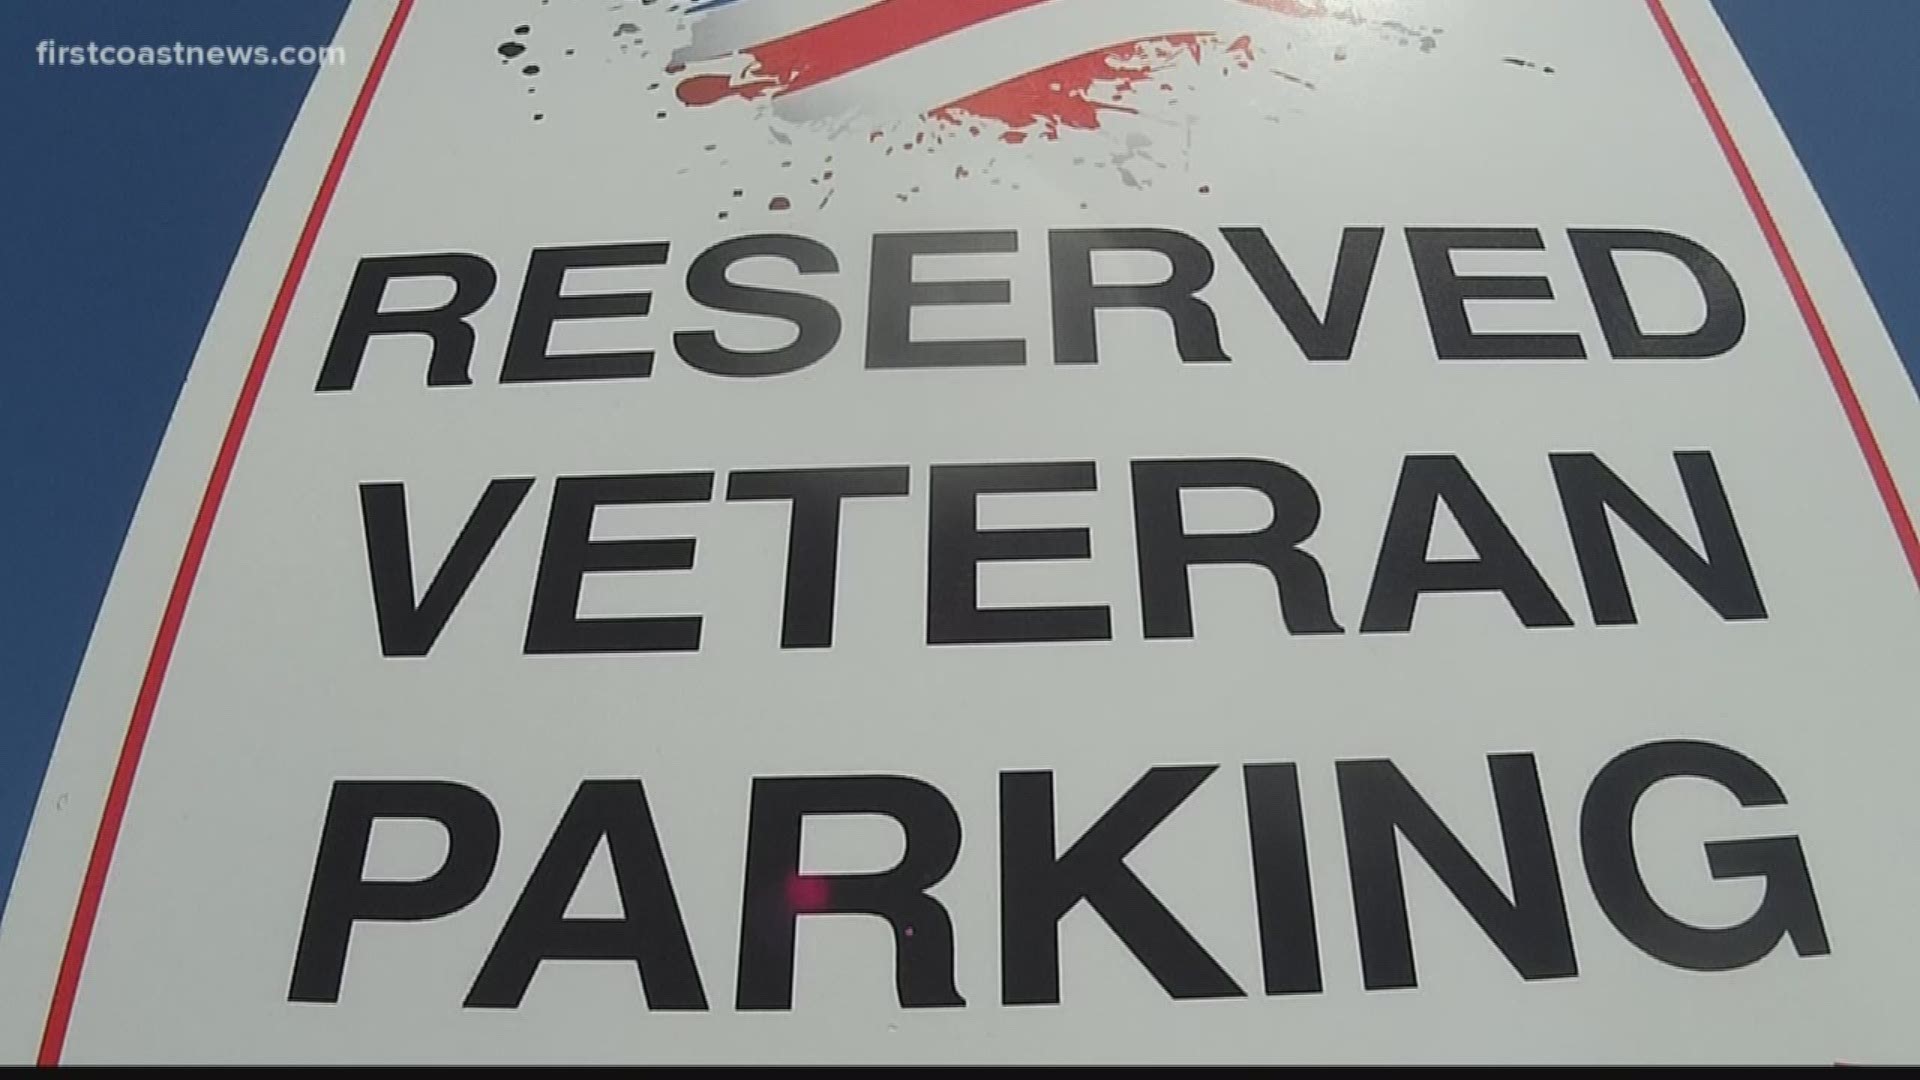 "Reserved for veteran parking" is a sign you'll find outside of Harris Teeter in St. Simons Island.